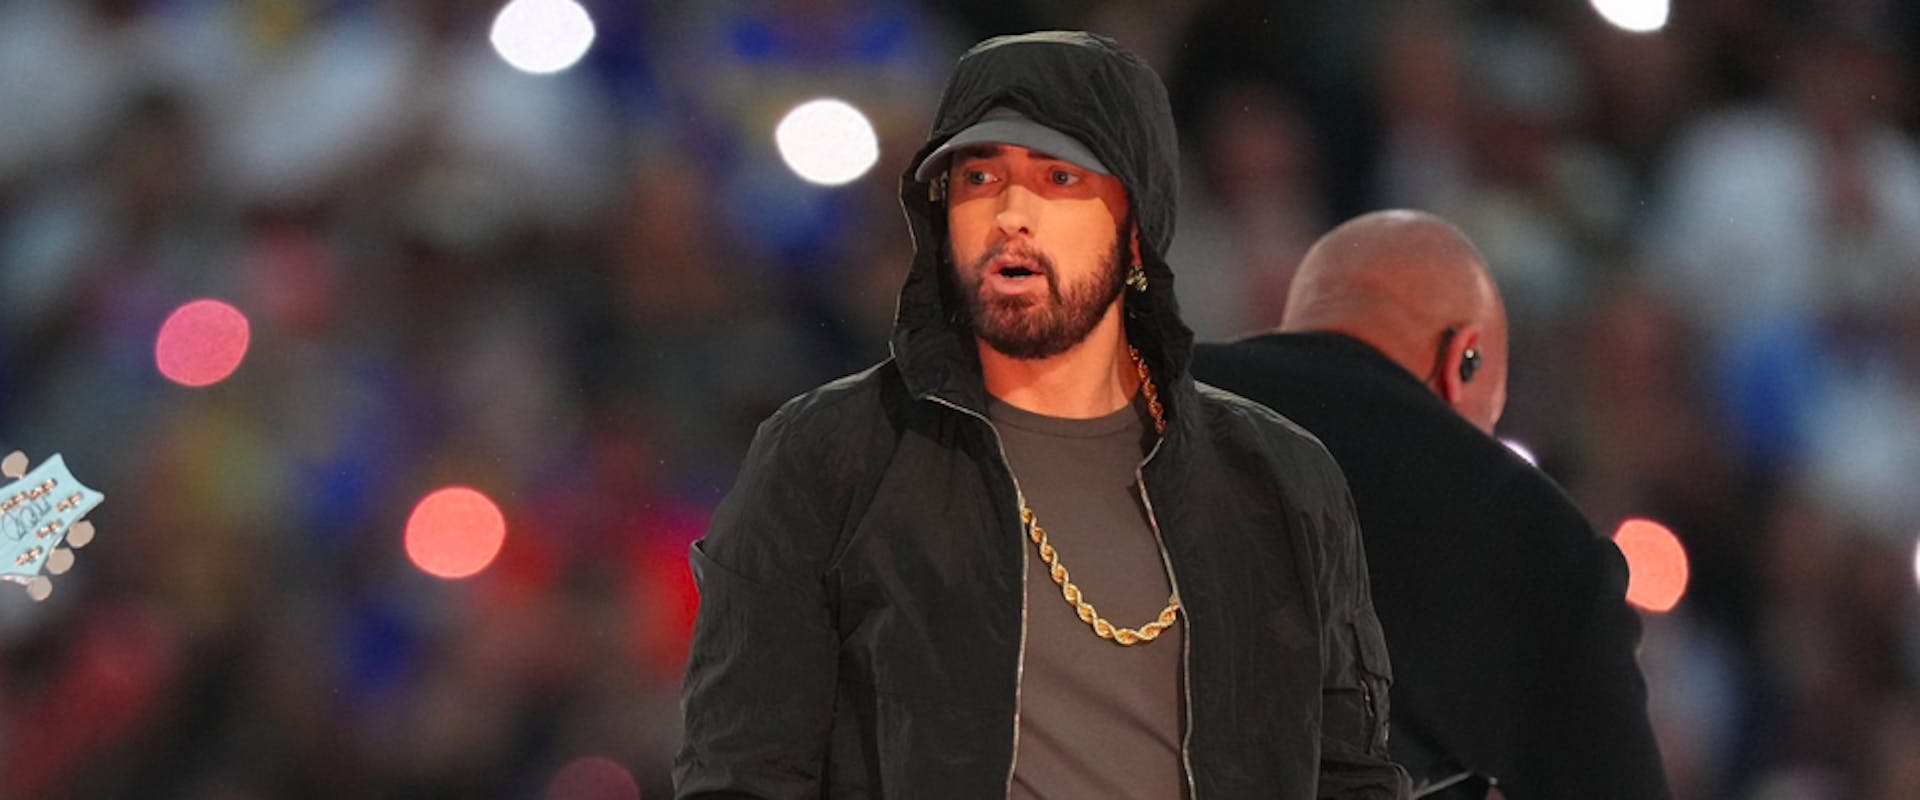 NGLEWOOD, CALIFORNIA - FEBRUARY 13: Eminem performs in the Pepsi Halftime Show during the NFL Super Bowl LVI football game between the Cincinnati Bengals and the Los Angeles Rams at SoFi Stadium on February 13, 2022 in Inglewood, California